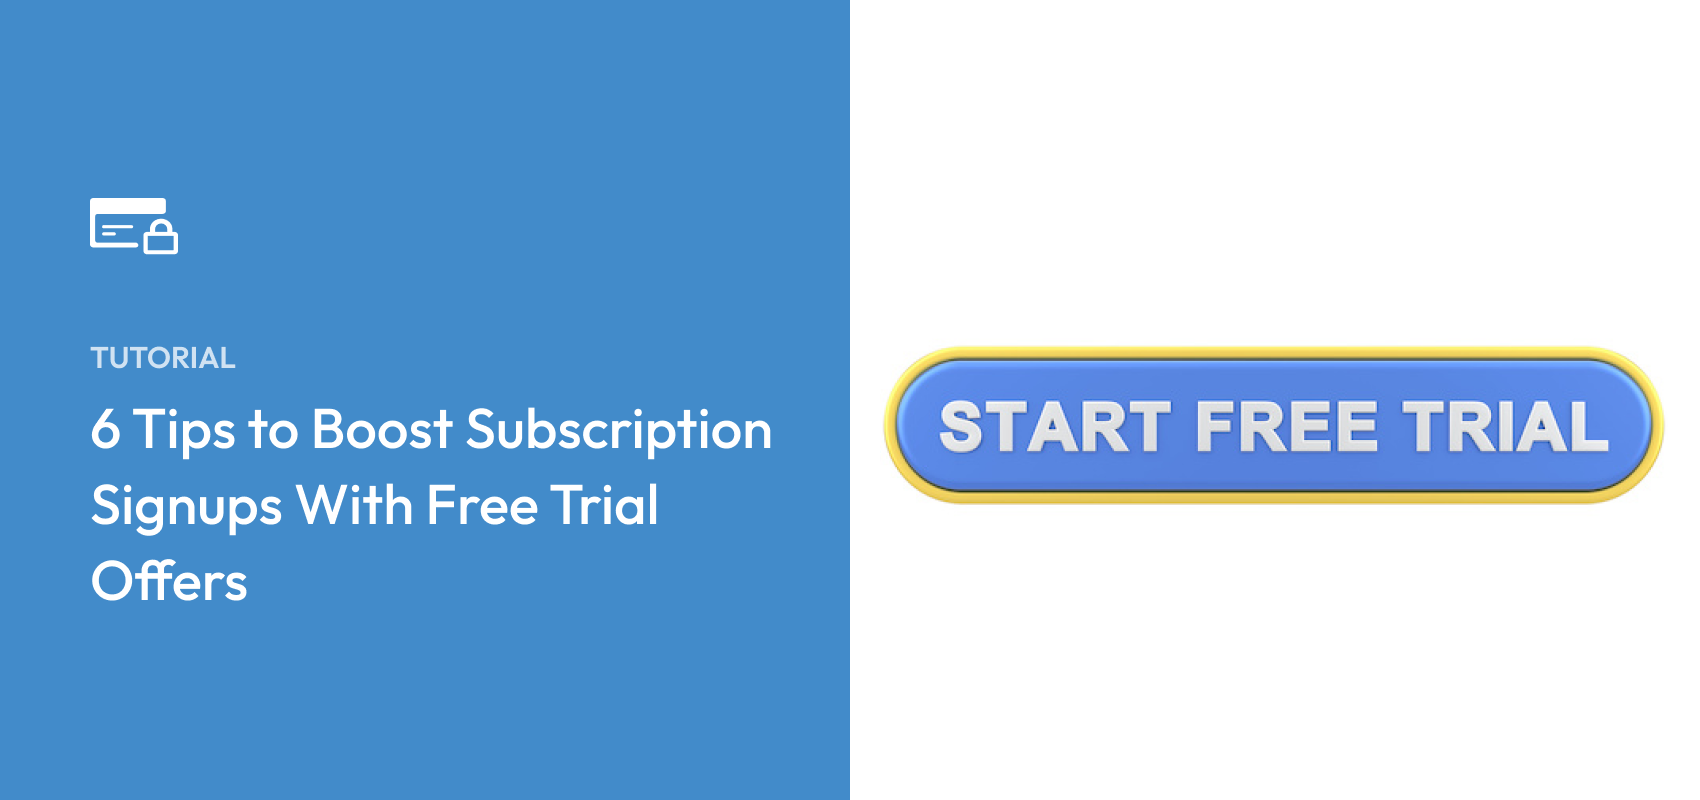 Complimentary trial offers